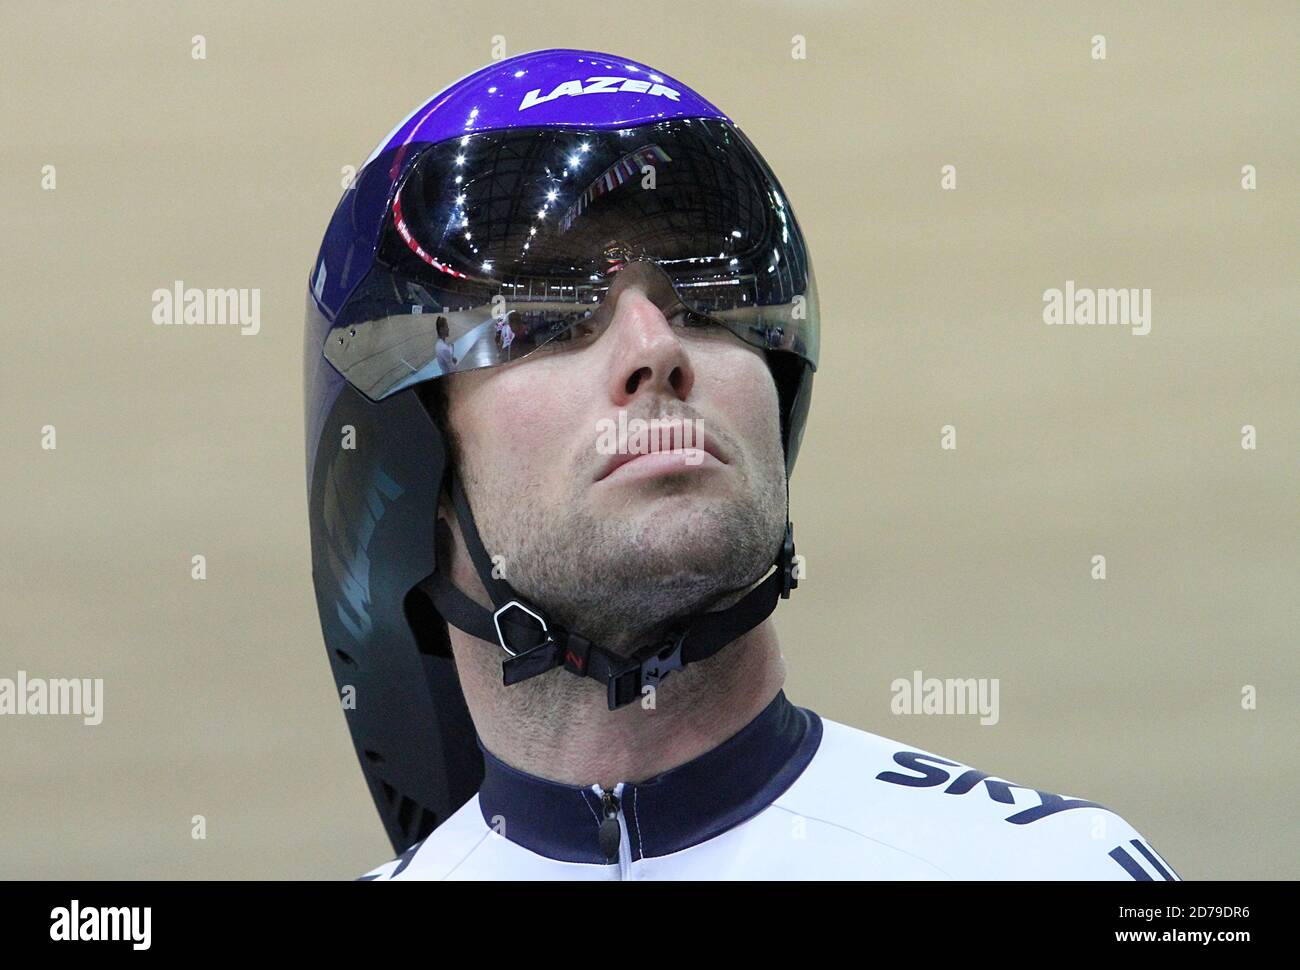 British cyclist Mark Cavendish during the International track cycling event “Panevėžys 2016“ in Lithuania. Stock Photo